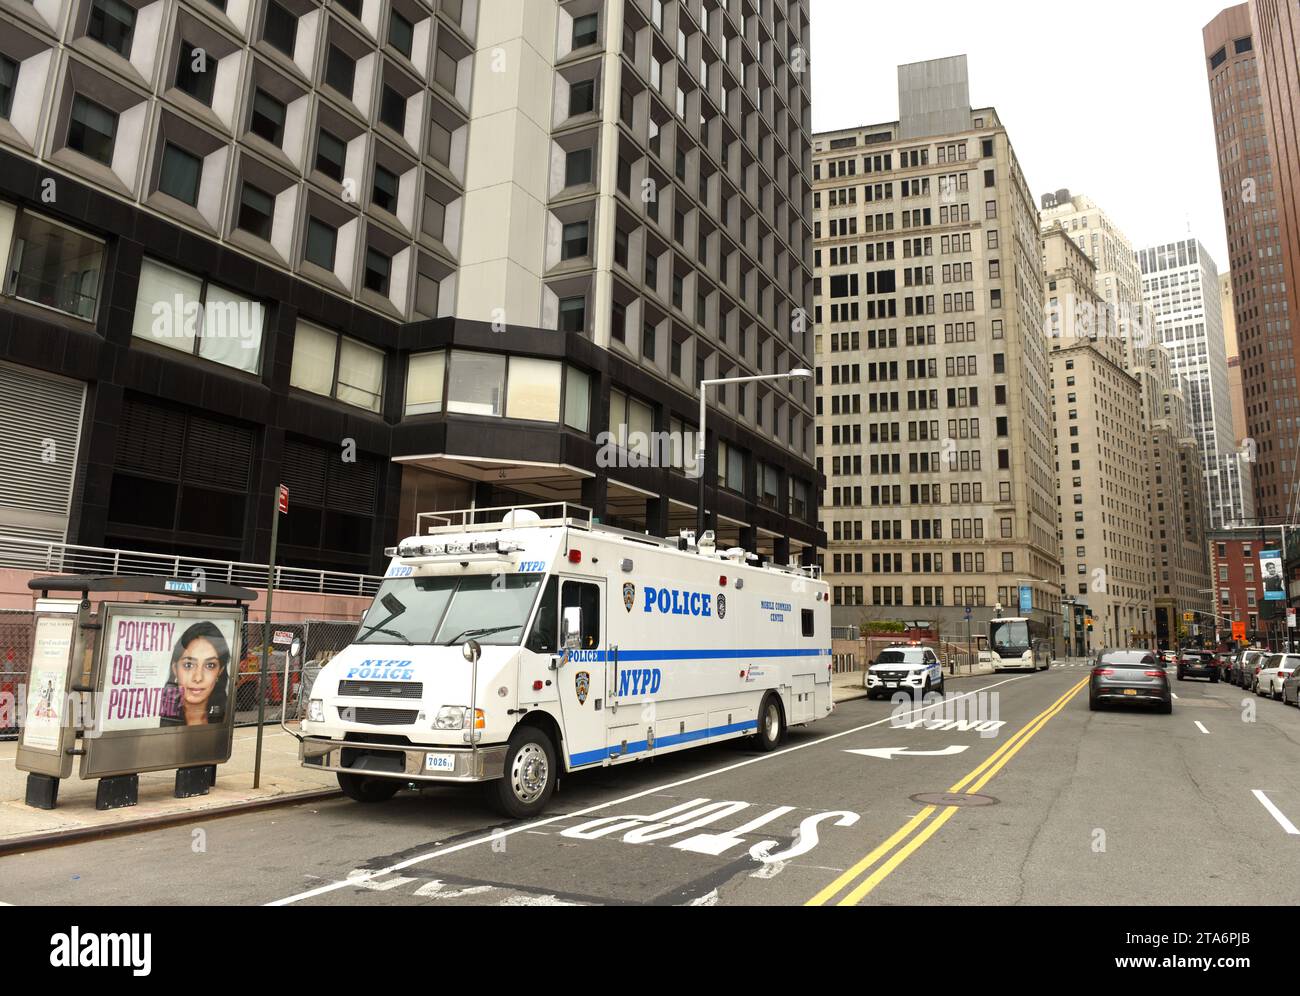 NEW YORK, USA - May 28, 2018: Police car of the New York City Police Department (NYPD) on the streets of Manhattan. Stock Photo